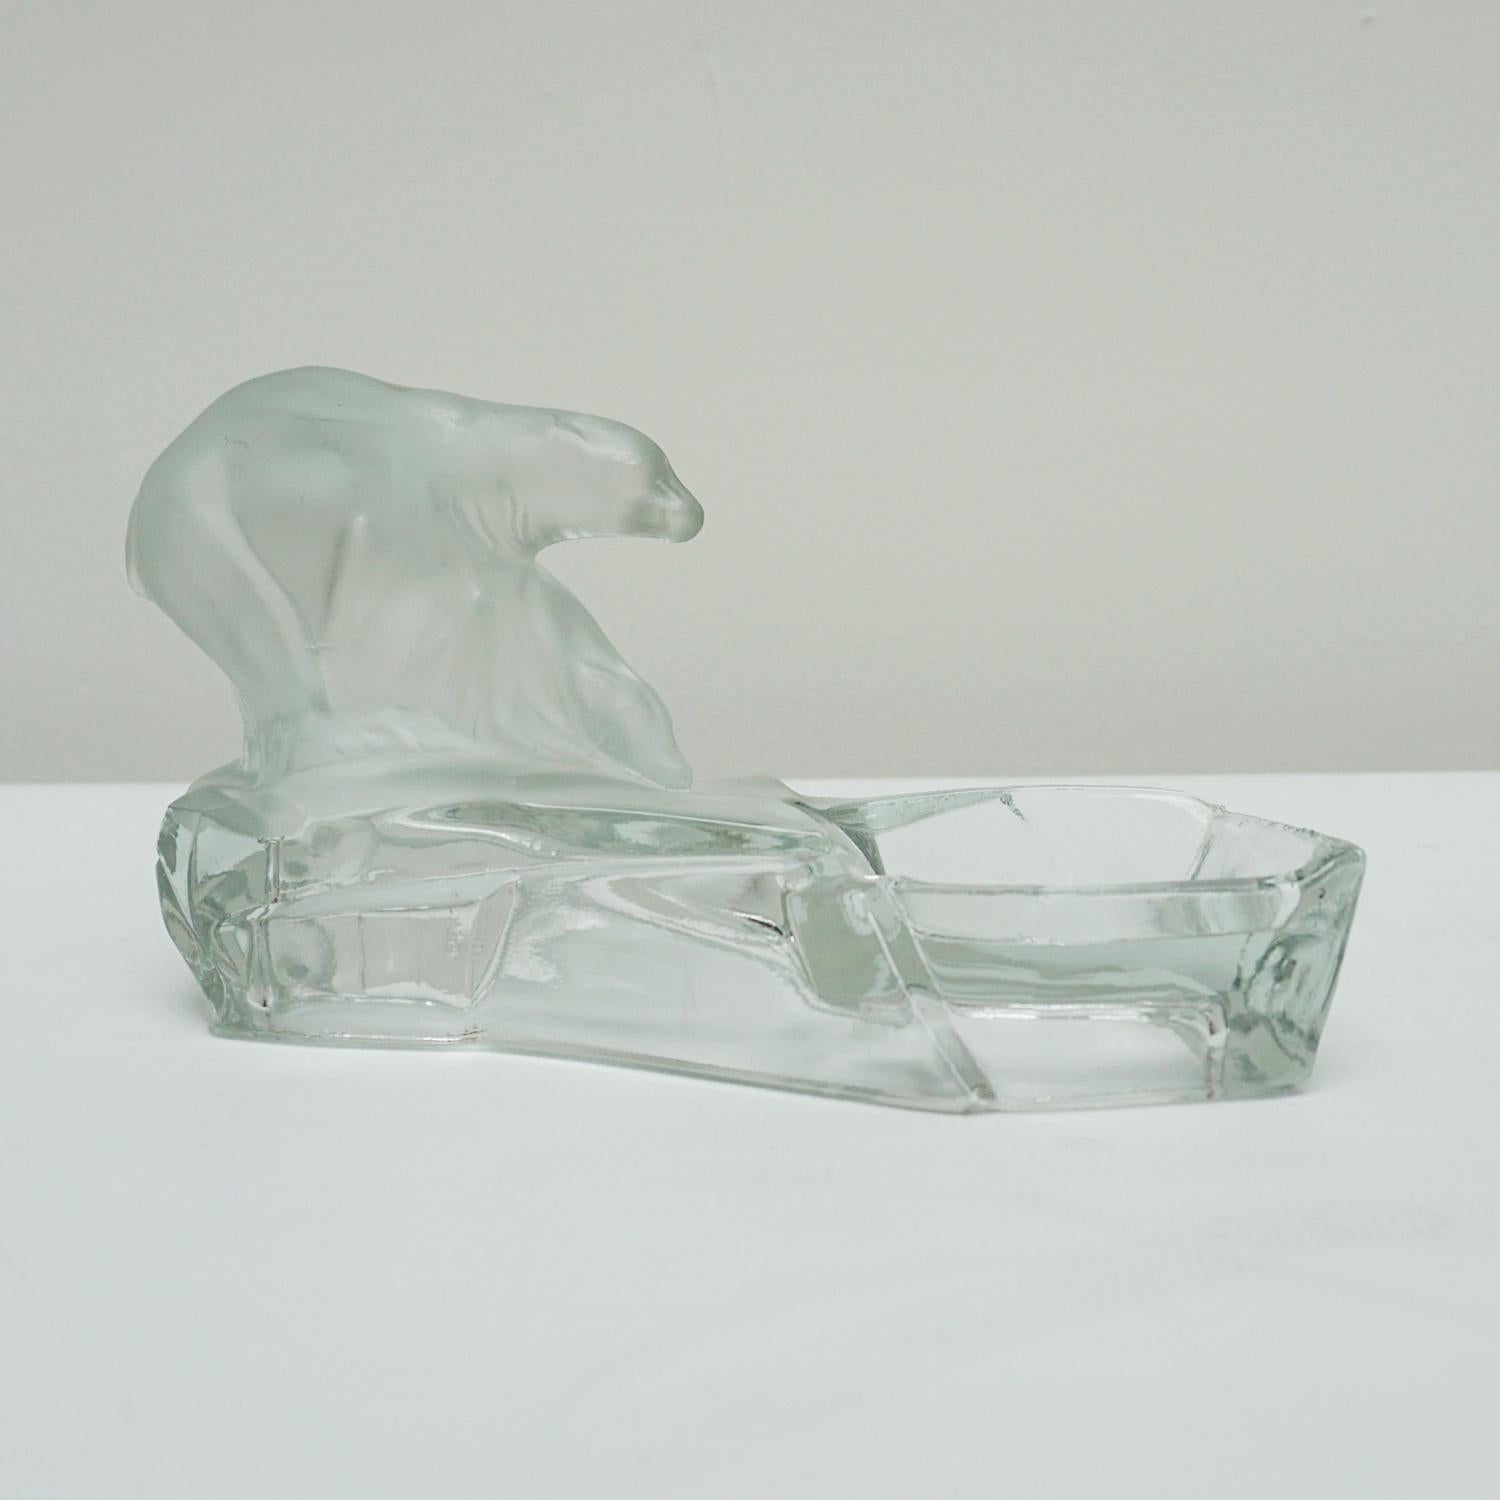 An Art Deco glass ashtray designed by Karel Zentner for by Feigl and Morawetz Libochovice glassworks, depicting a polar bear and cub standing on an ice floe. Frosted and clear glass. Stamped to underside. 
Dimensions: H 13cm W 23cm D 10cm